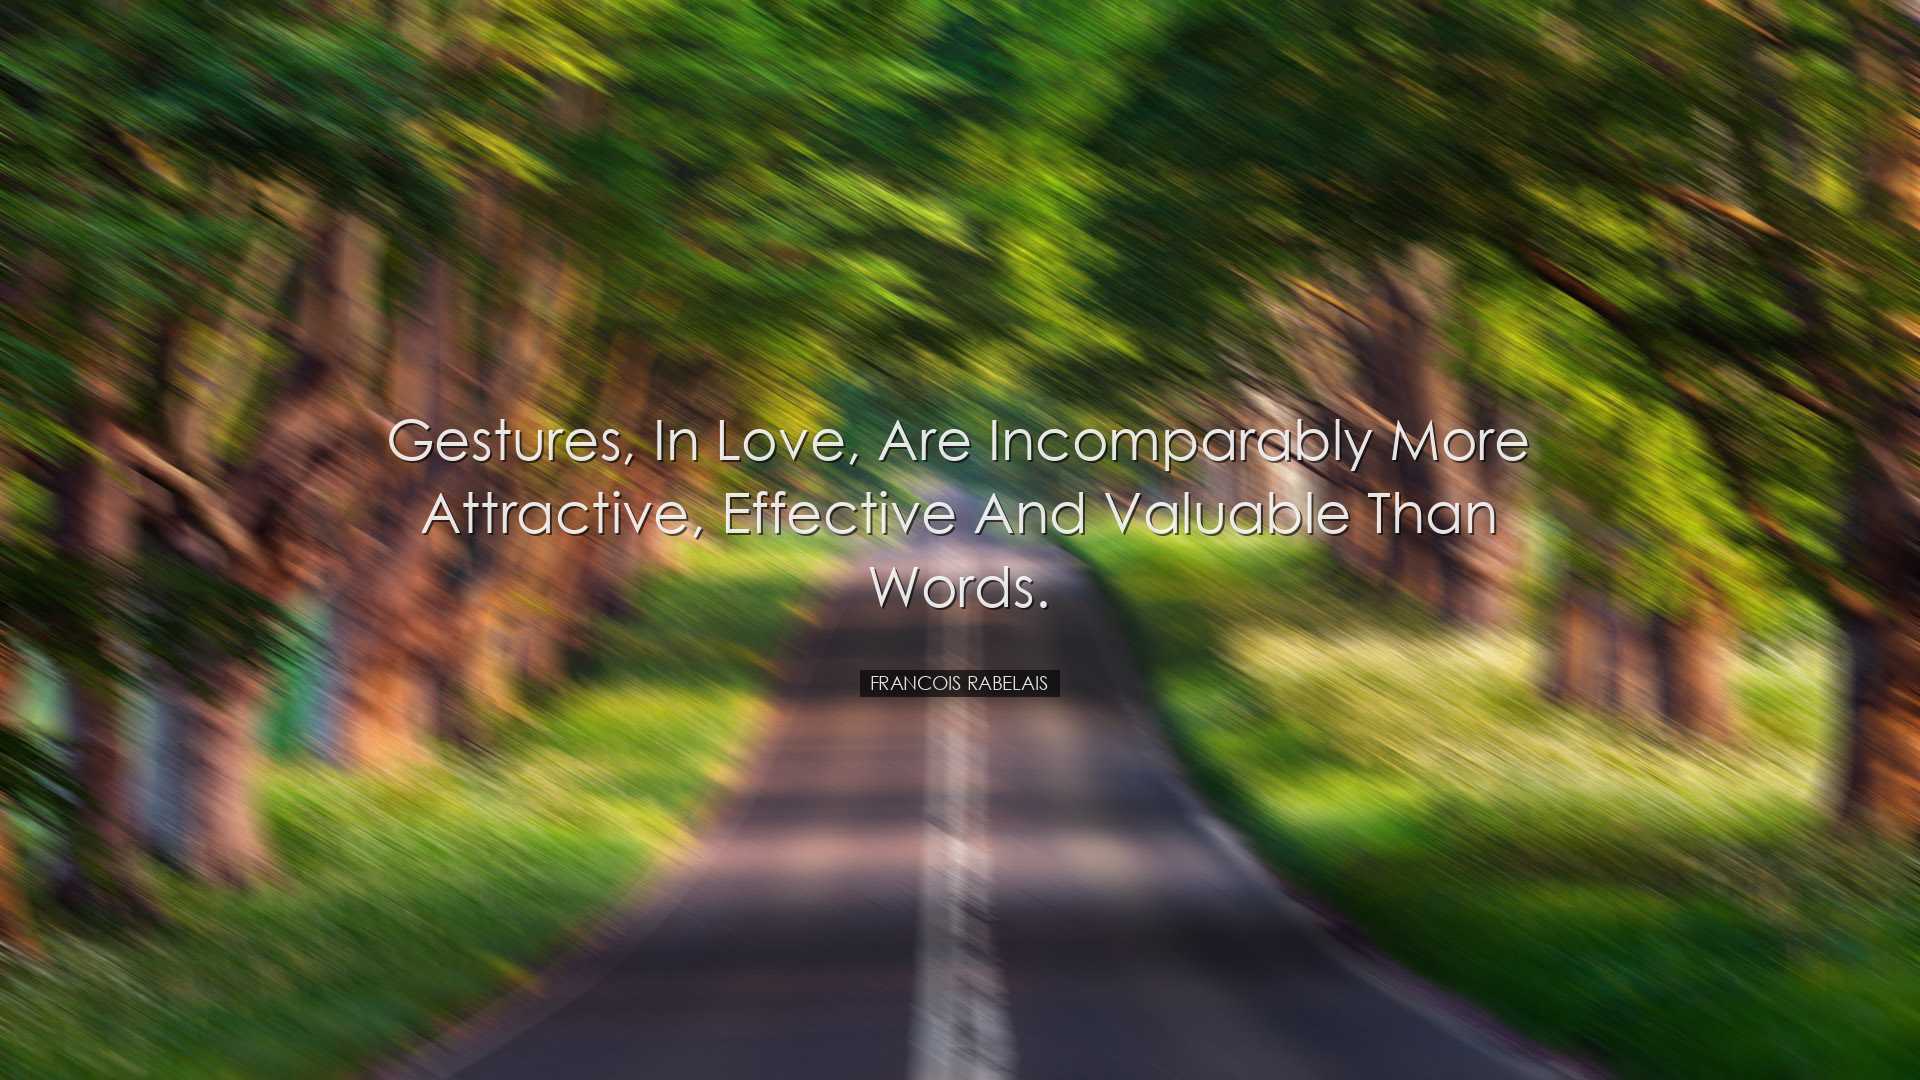 Gestures, in love, are incomparably more attractive, effective and